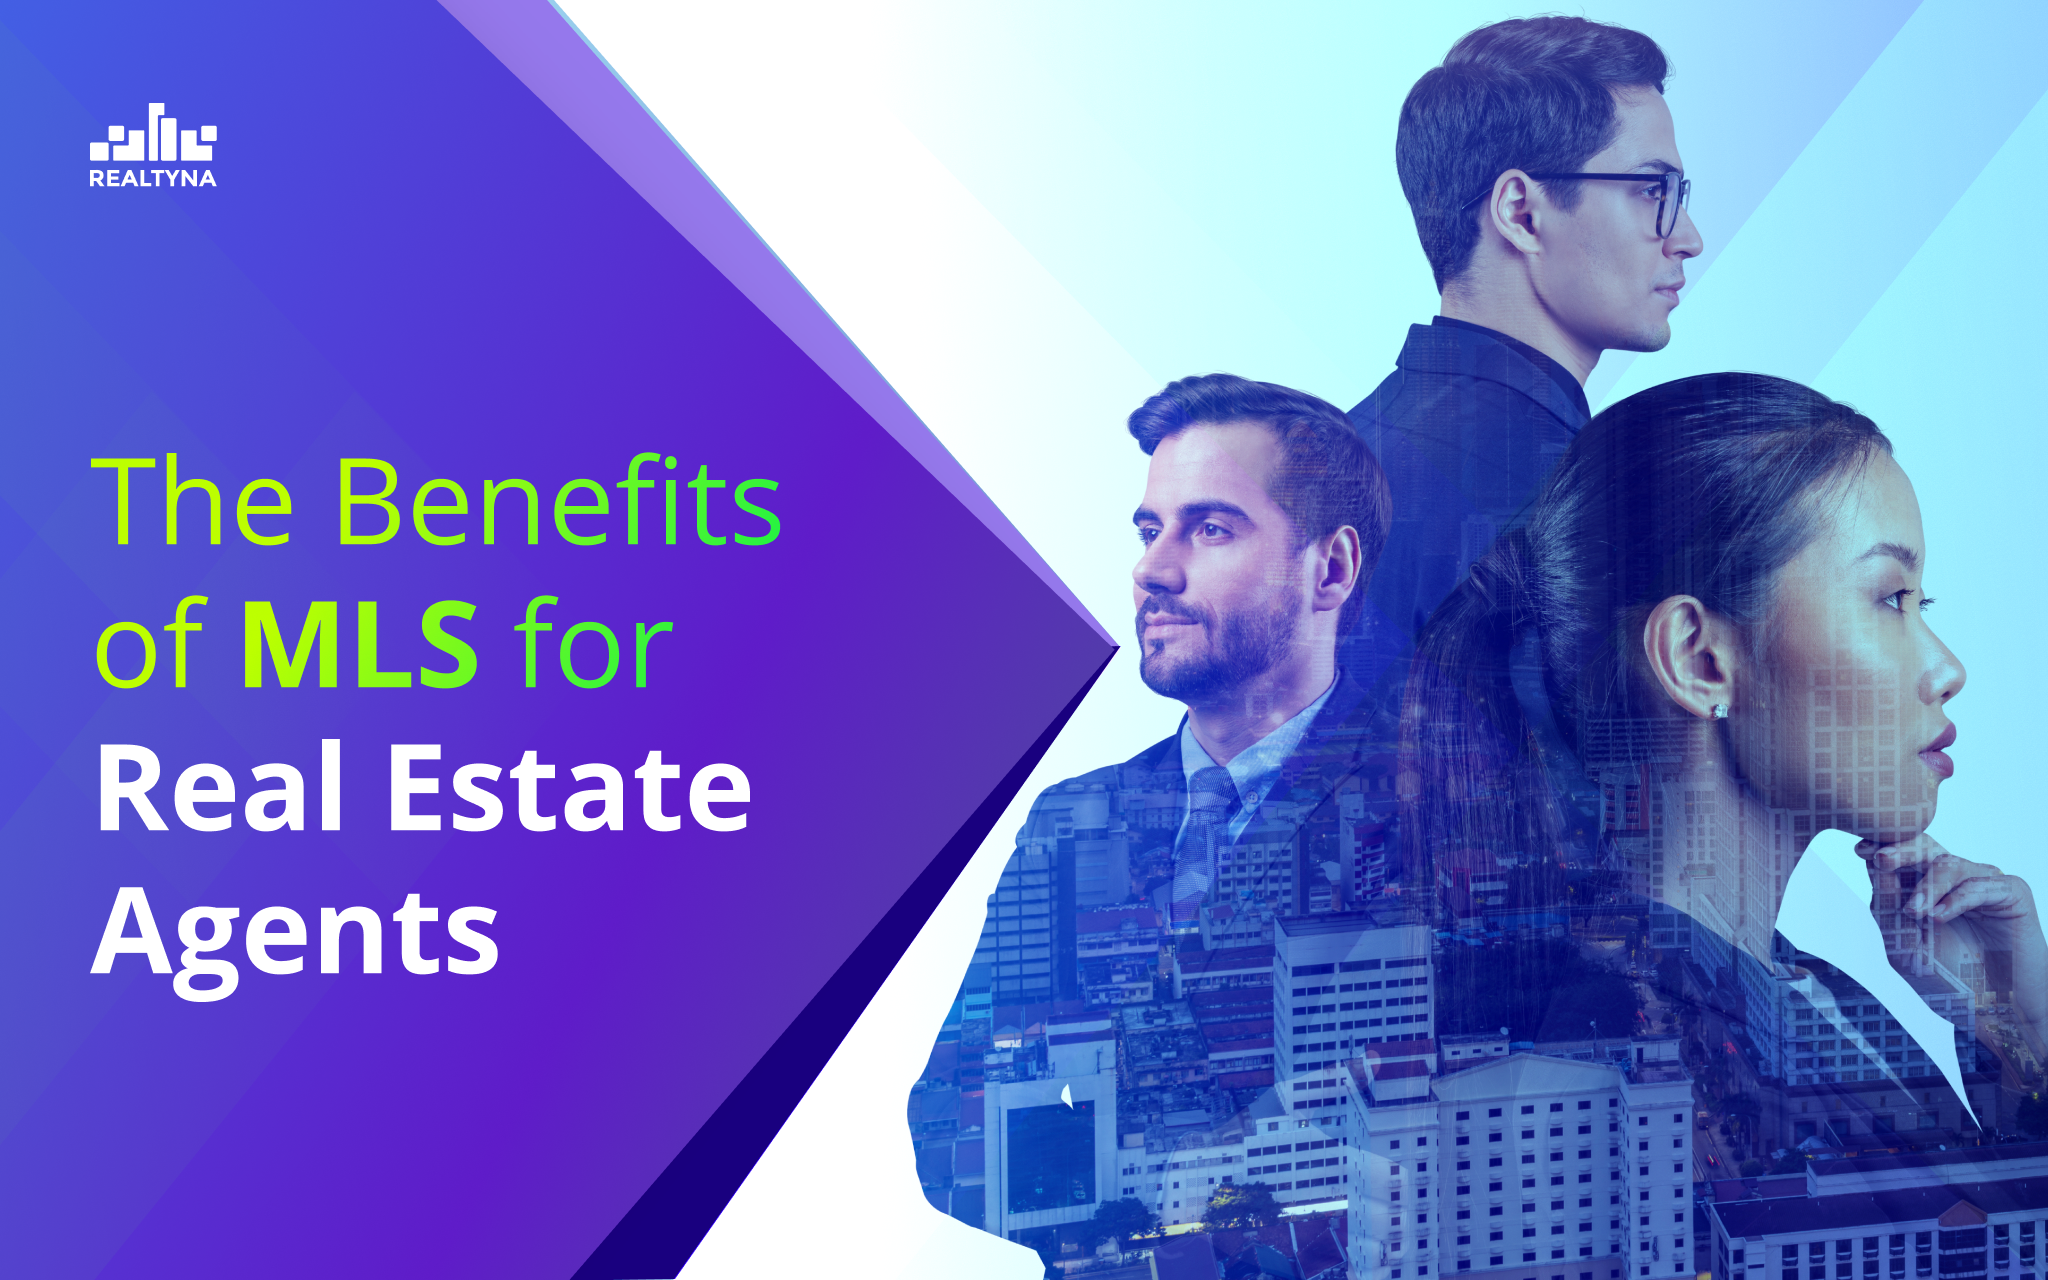 The Benefits of MLS for Real Estate Agents